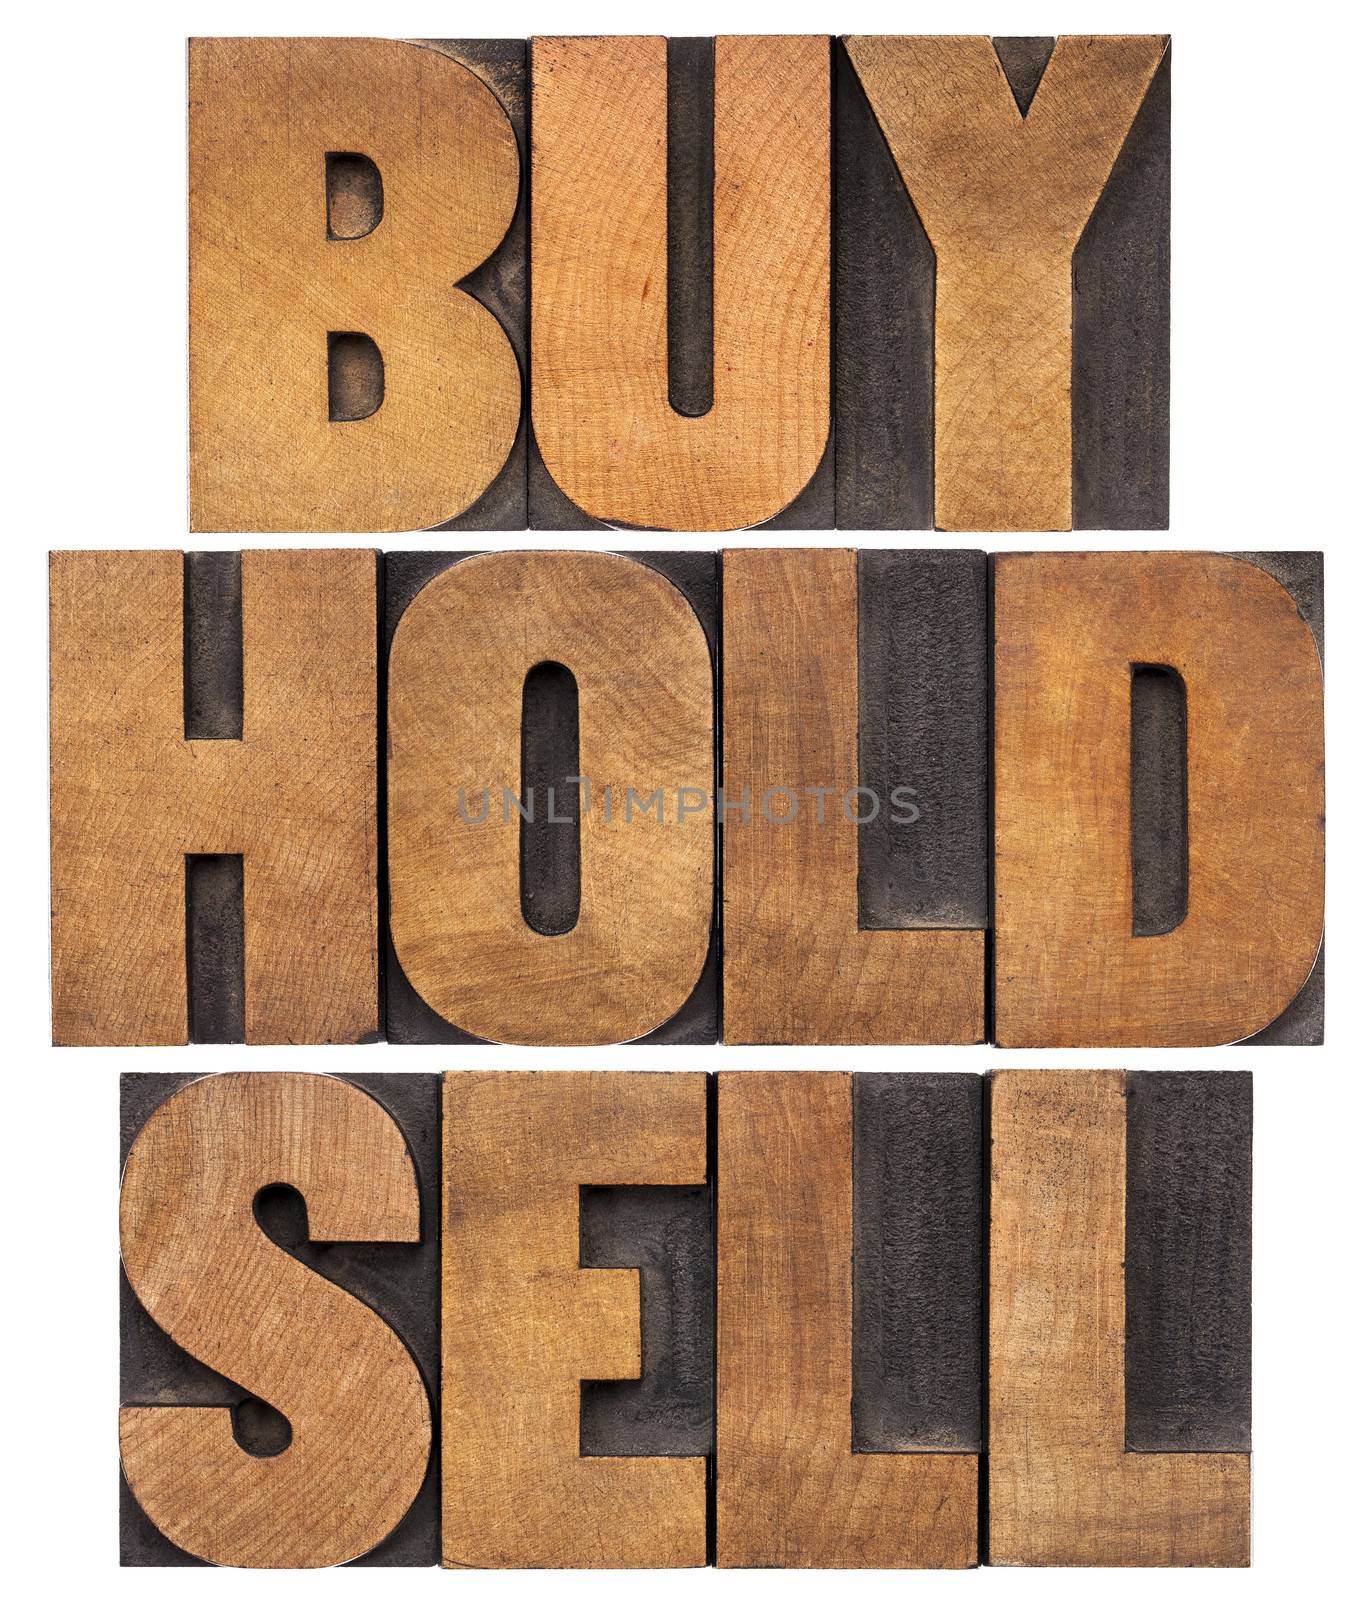 buy, hold, sell - investing concept - isolated words in vintage letterpress wood type